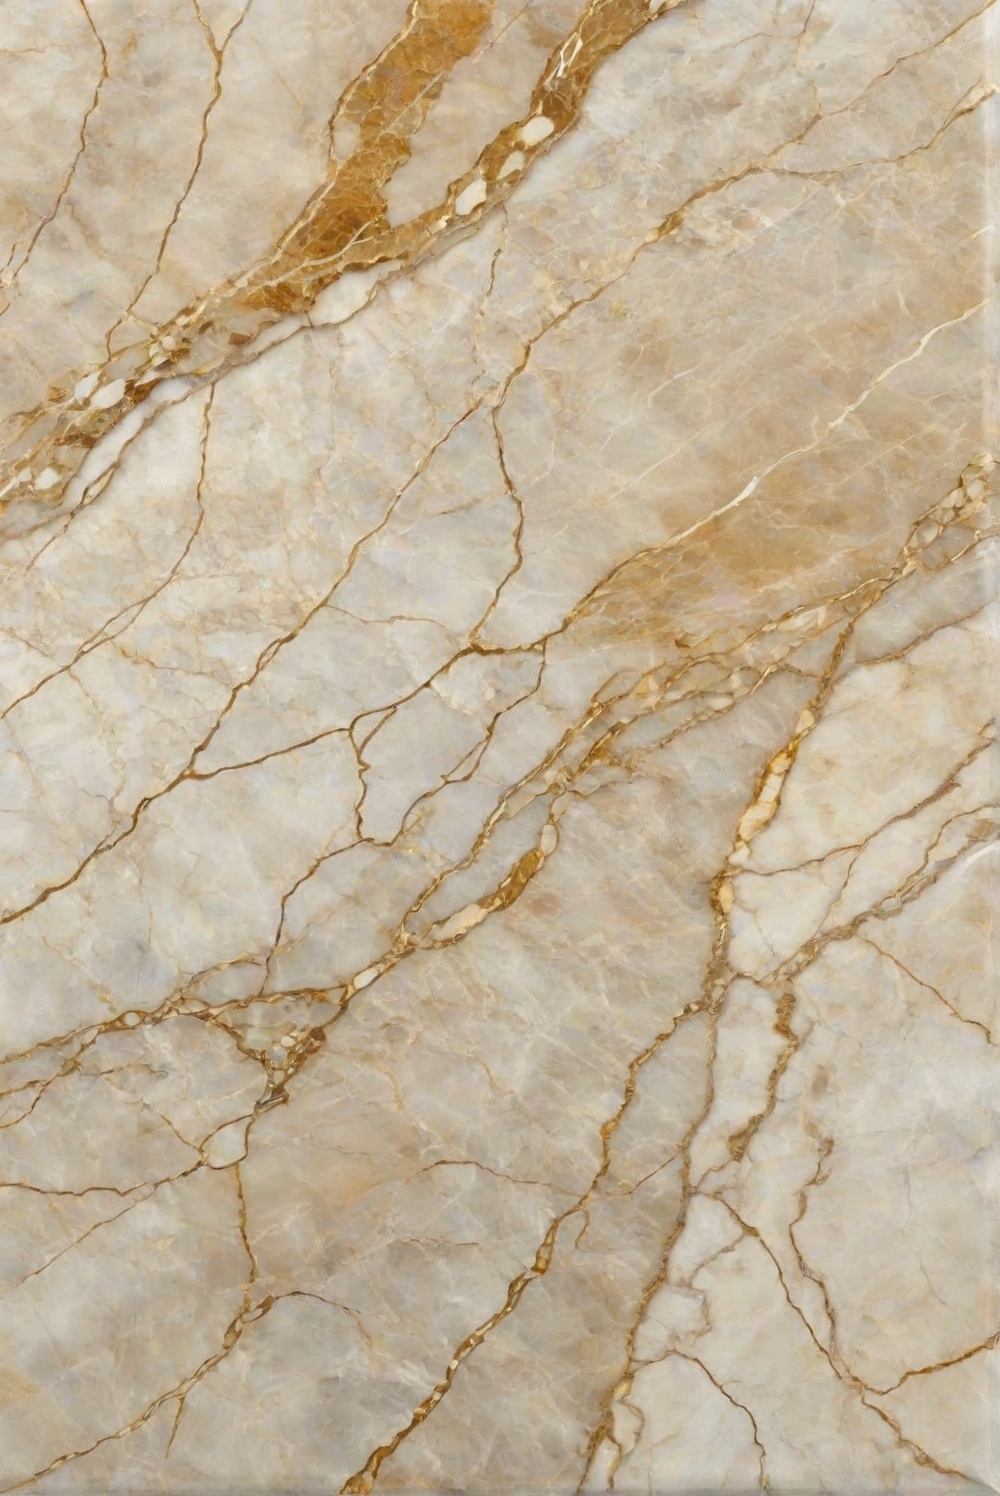 What are the Benefits of Using Honed Taj Mahal Quartzite in Your Home? (Discover Luxury